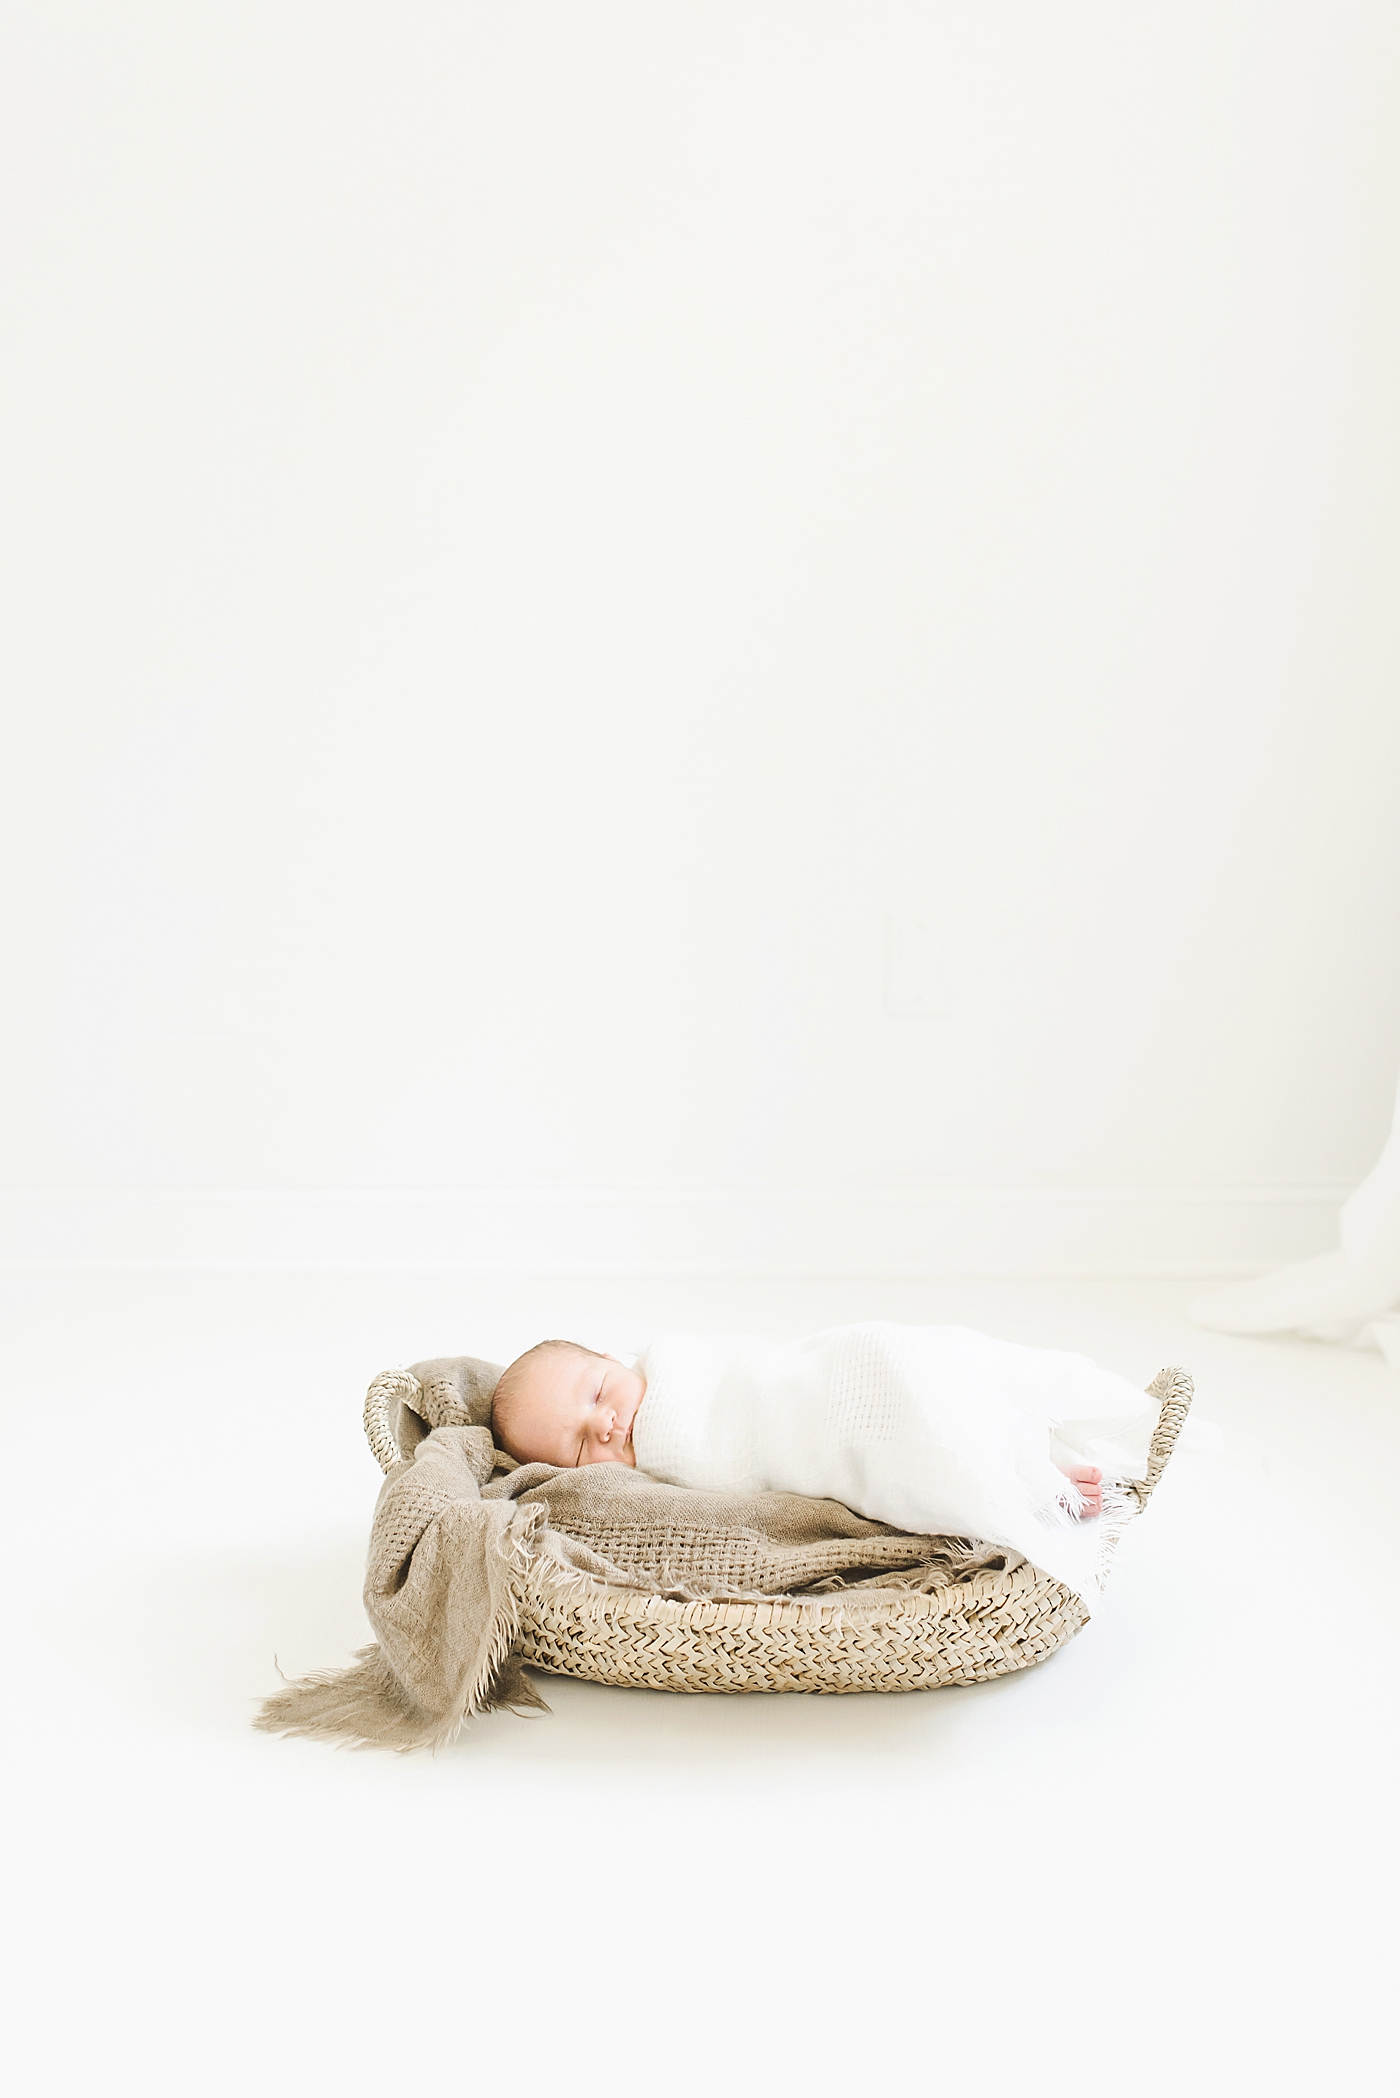 Baby boy wrapped in swaddle sleeping in a basket | Photo by Anna Wisjo Photography